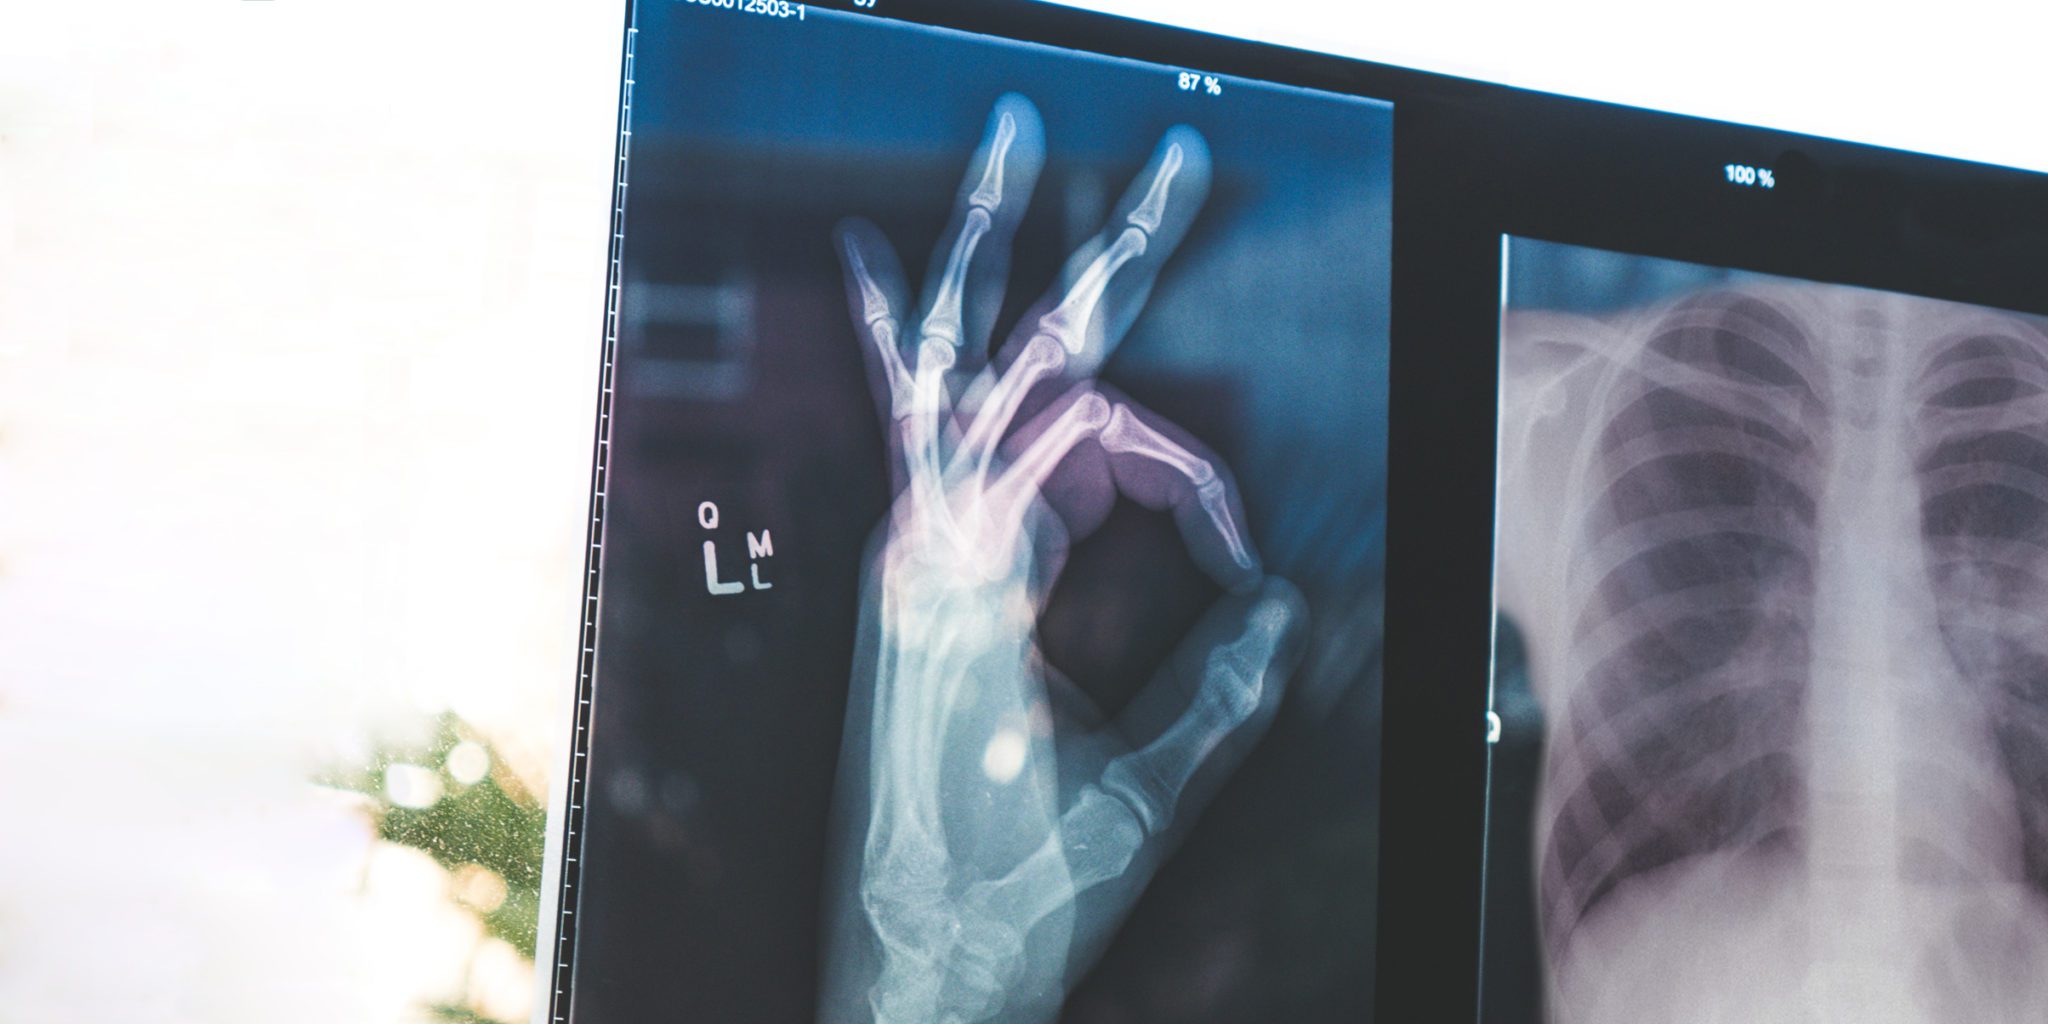 chest and okay sign hand x-rays